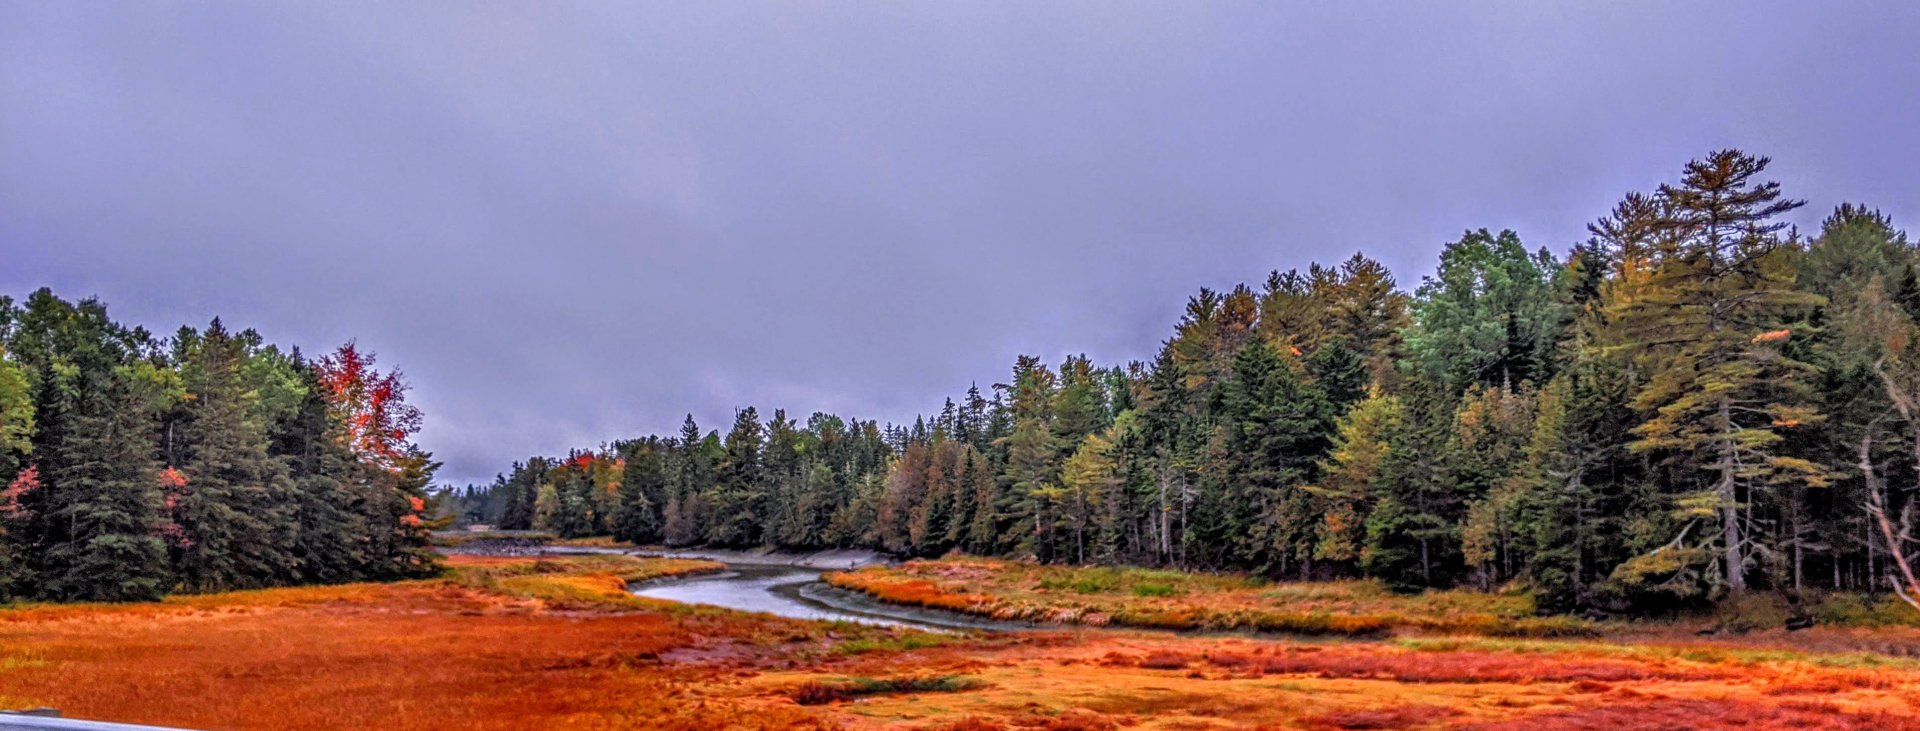 sep, 29 2020 stream with trees and yellow grass in Perry, Maine.